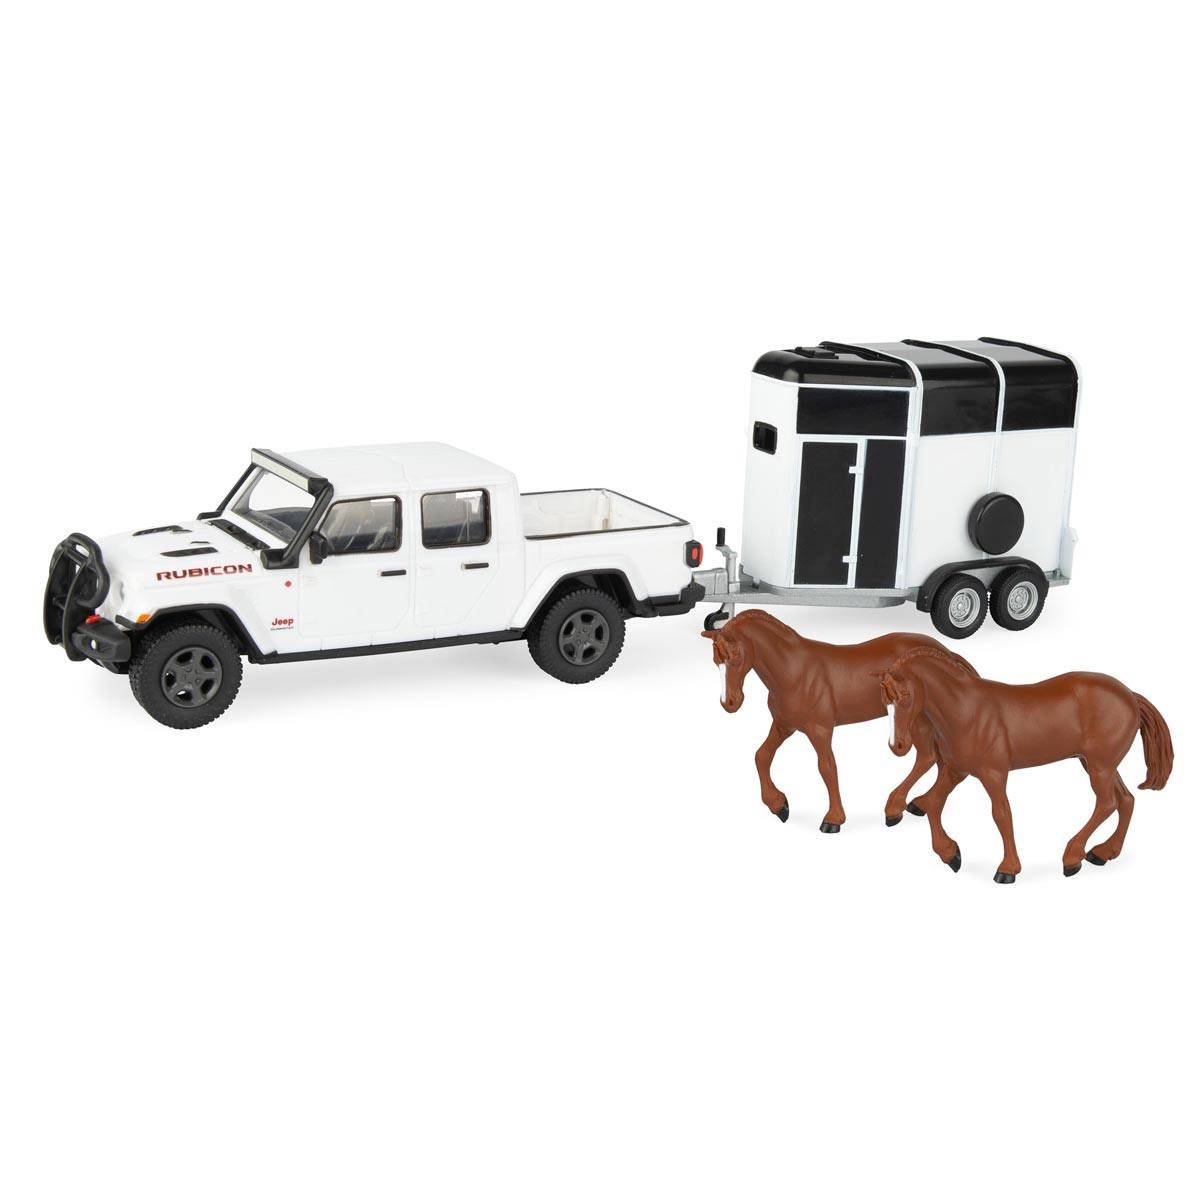 Ertl 47366 1:32 Jeep Gladiator Rubicon with Horse Trailer